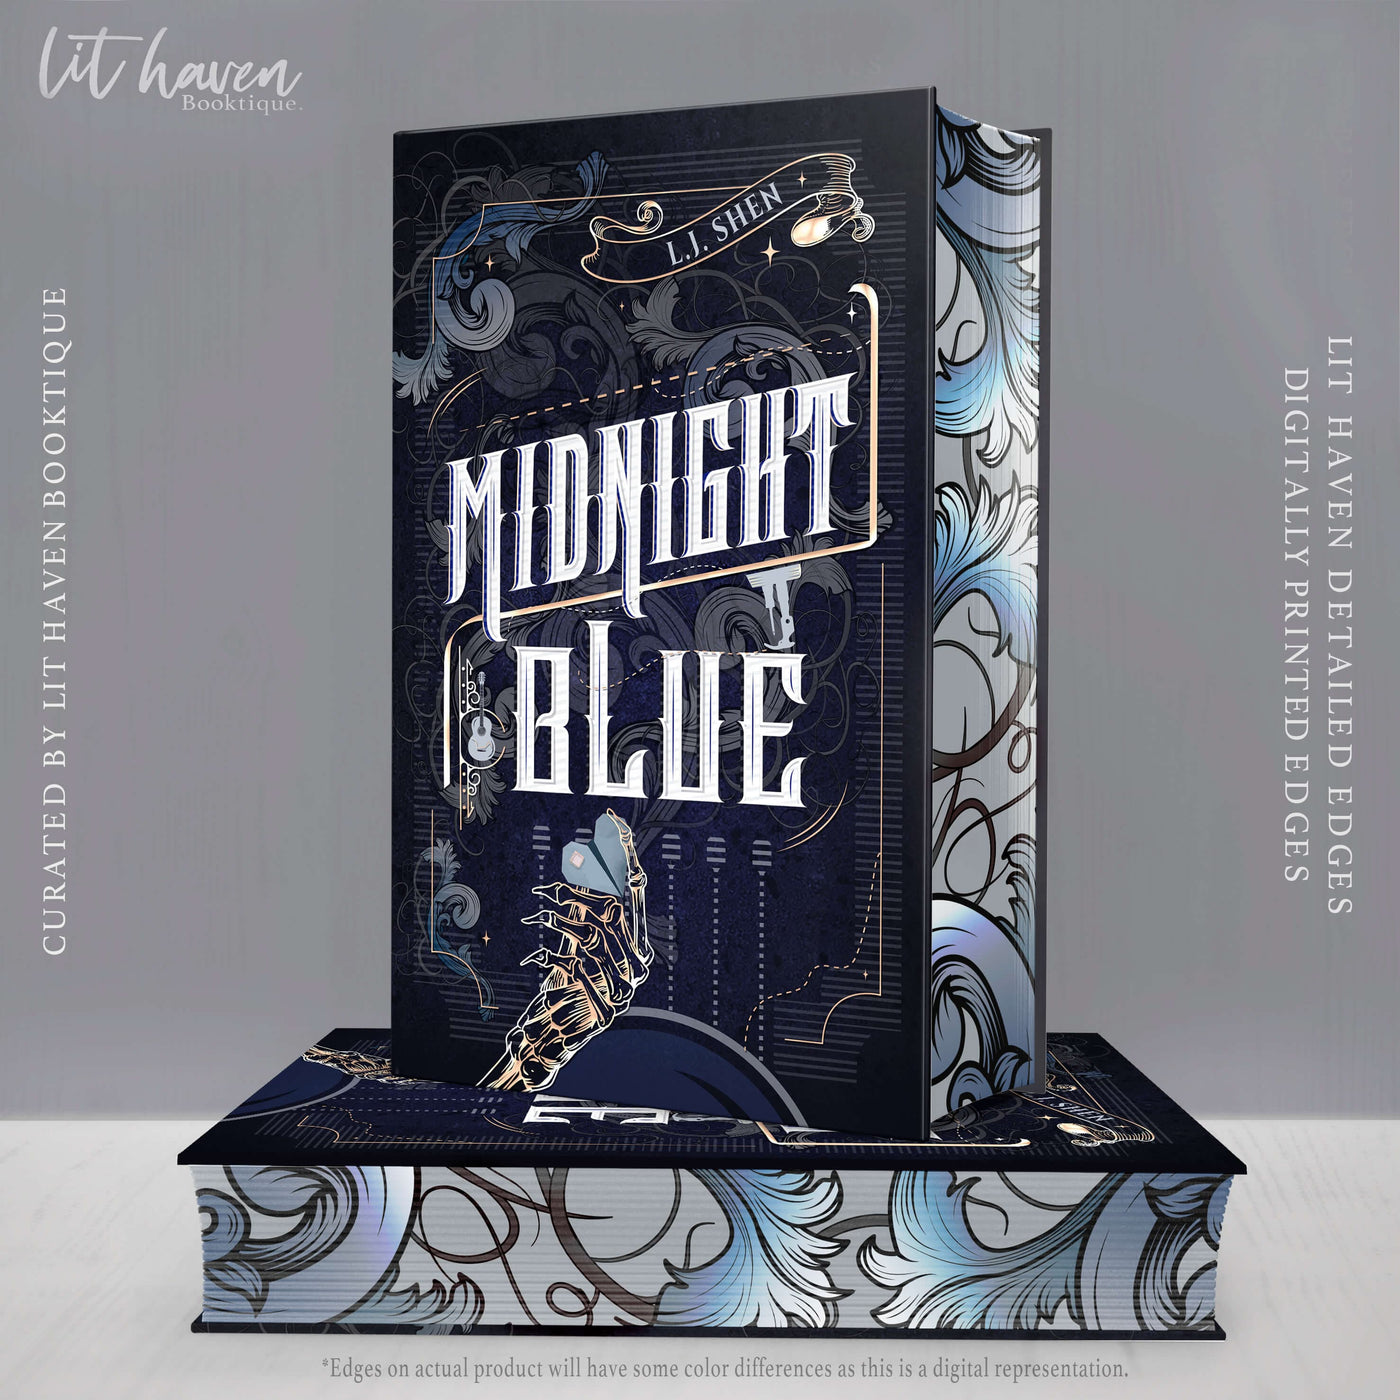 Lit Haven Booktique Book Digitally Printed Edges Midnight Blue Hardcover Edition Preorder